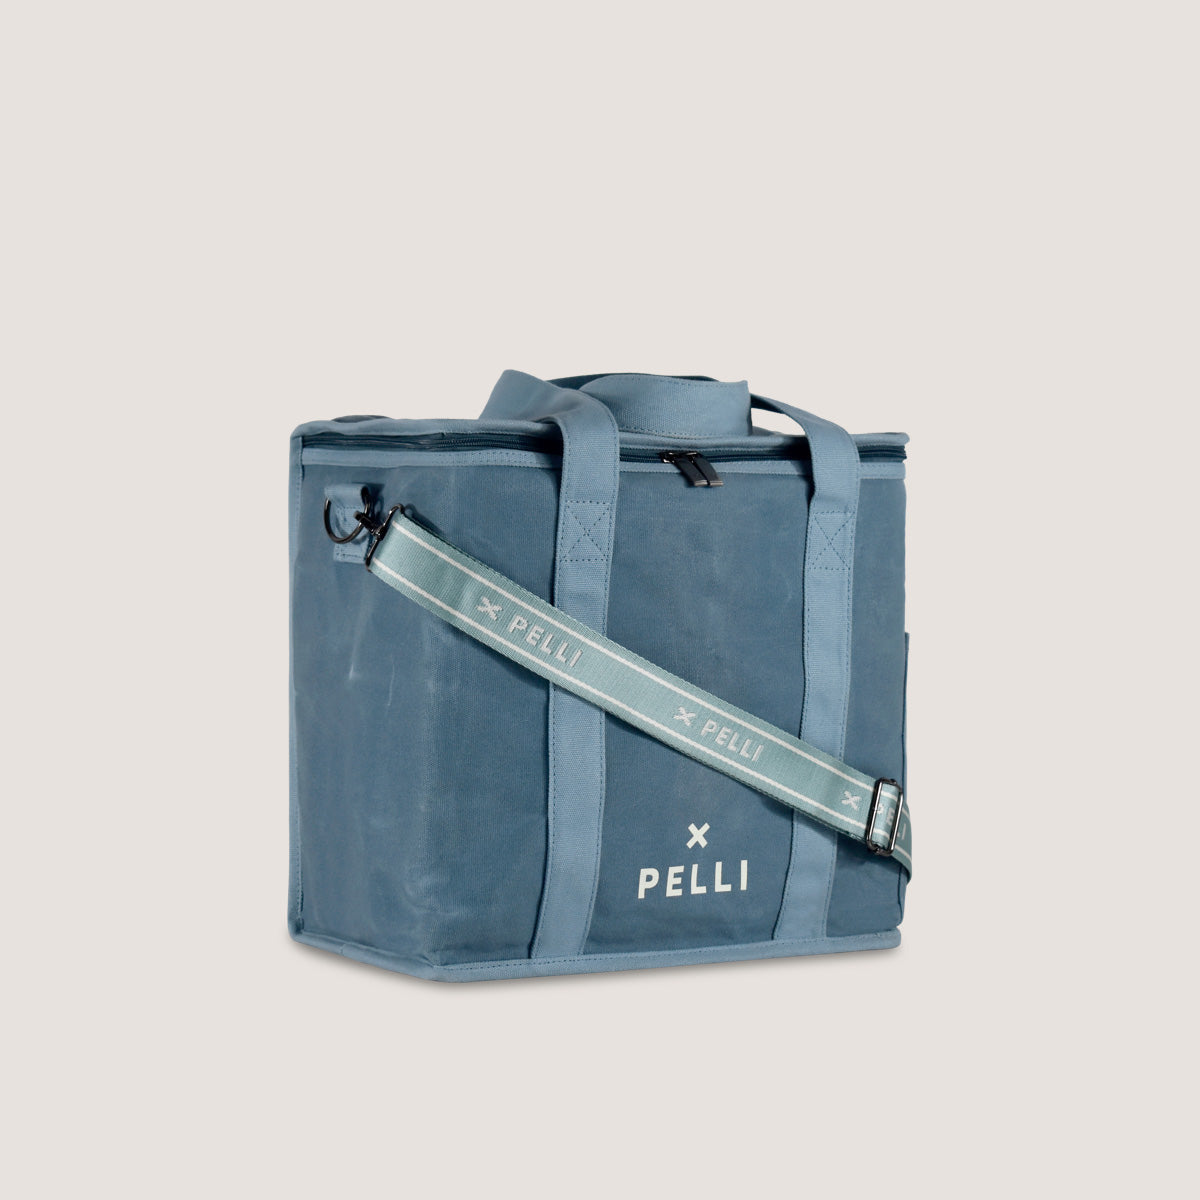 SECONDS OK Chill Crossbody - Waxed Canvas Medium Cooler Bag with Shoulder Strap in Dusty Blue